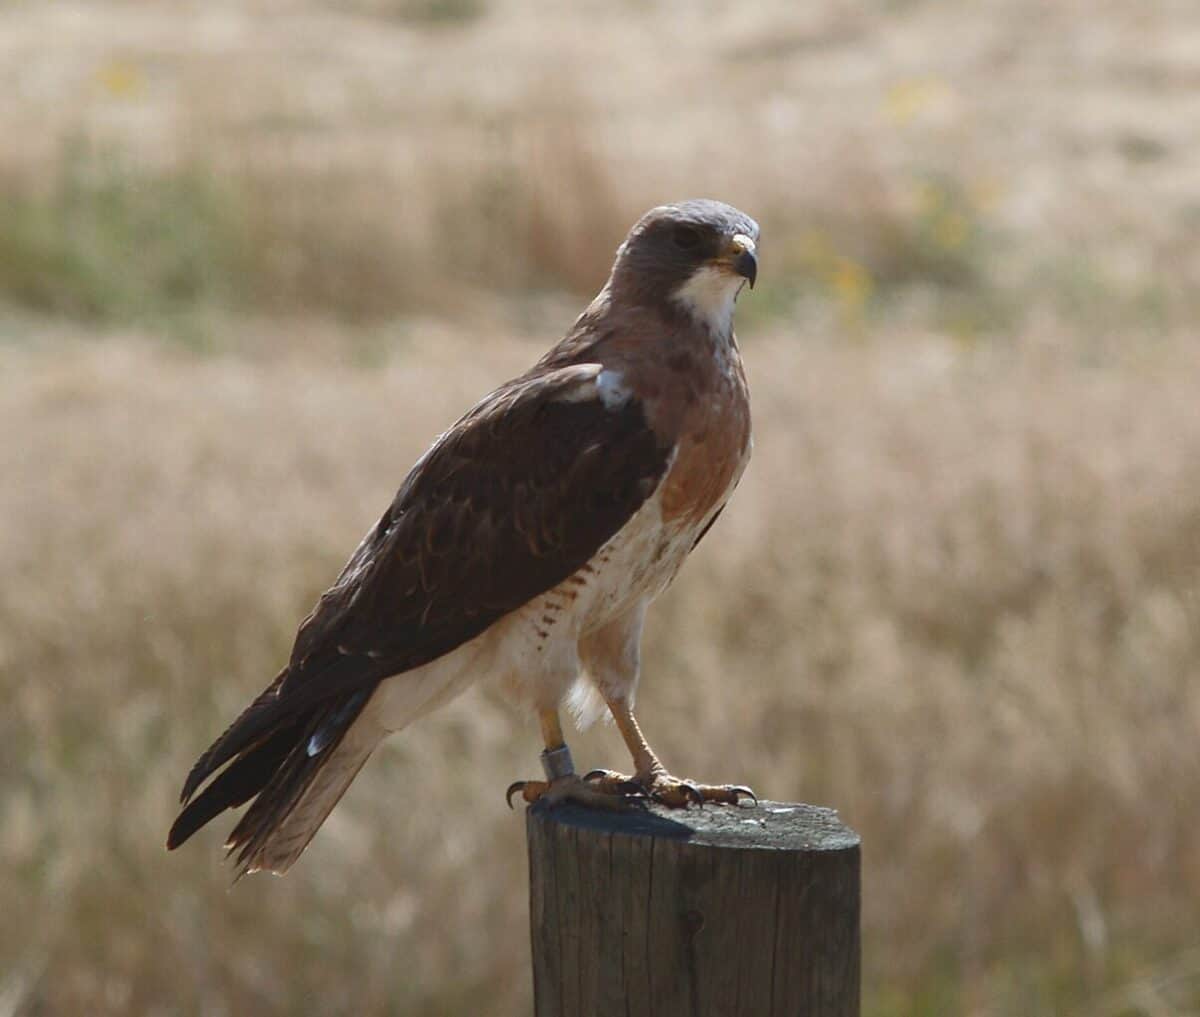 A Swainson's Hawk. Own work, CC BY-SA 2.5 https://creativecommons.org/licenses/by-sa/2.5, via Wikimedia Commons